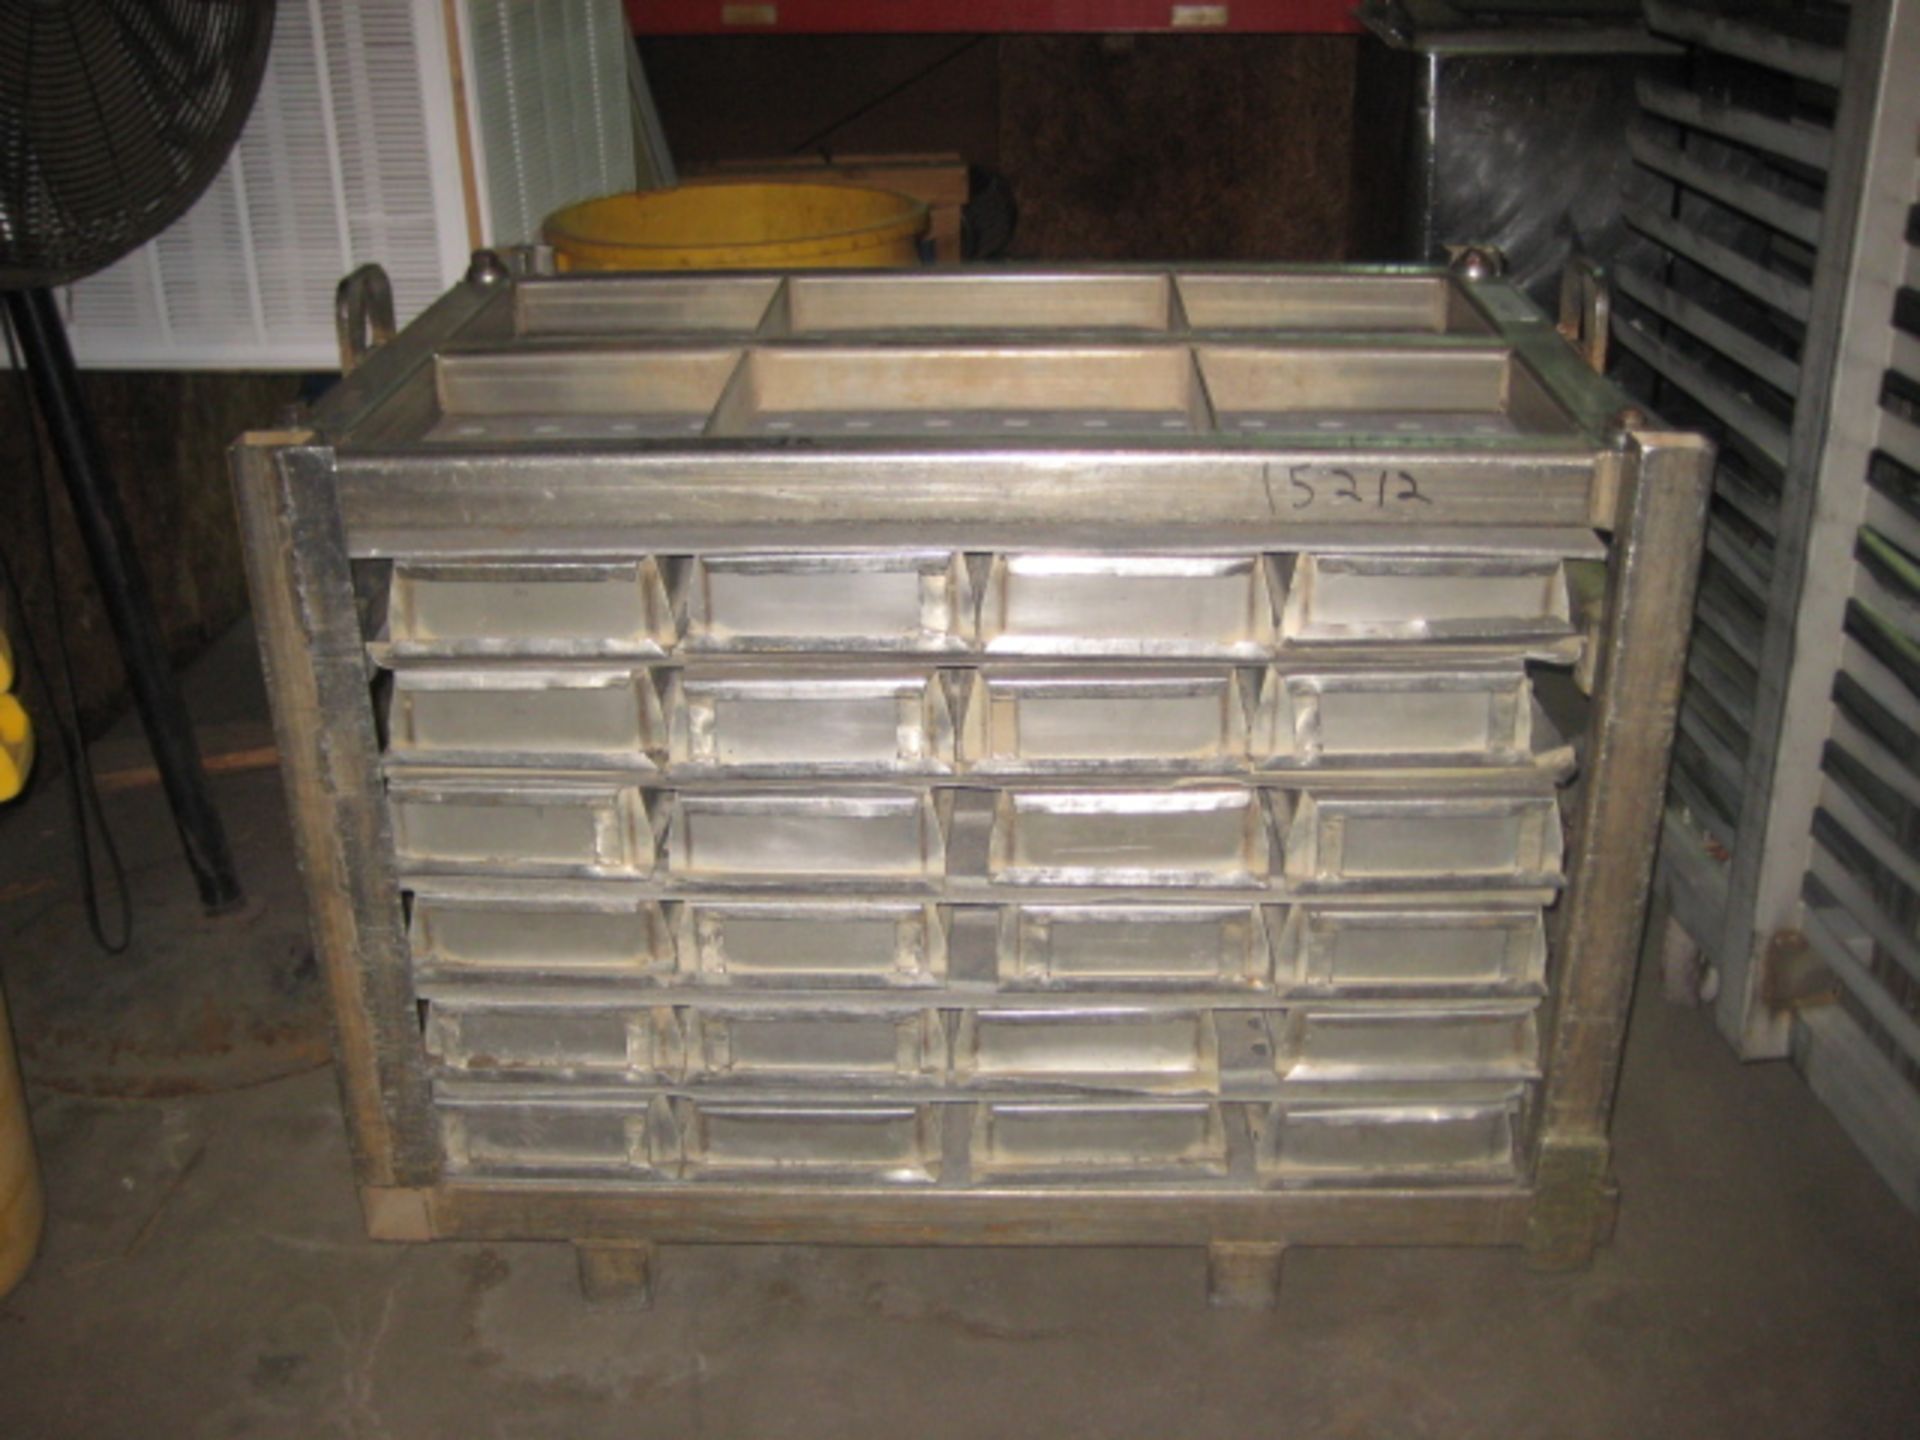 Stainless Steel Product mold tower 24 trays,9"W x 3.75"dp x 32.5"L mold in each tray.